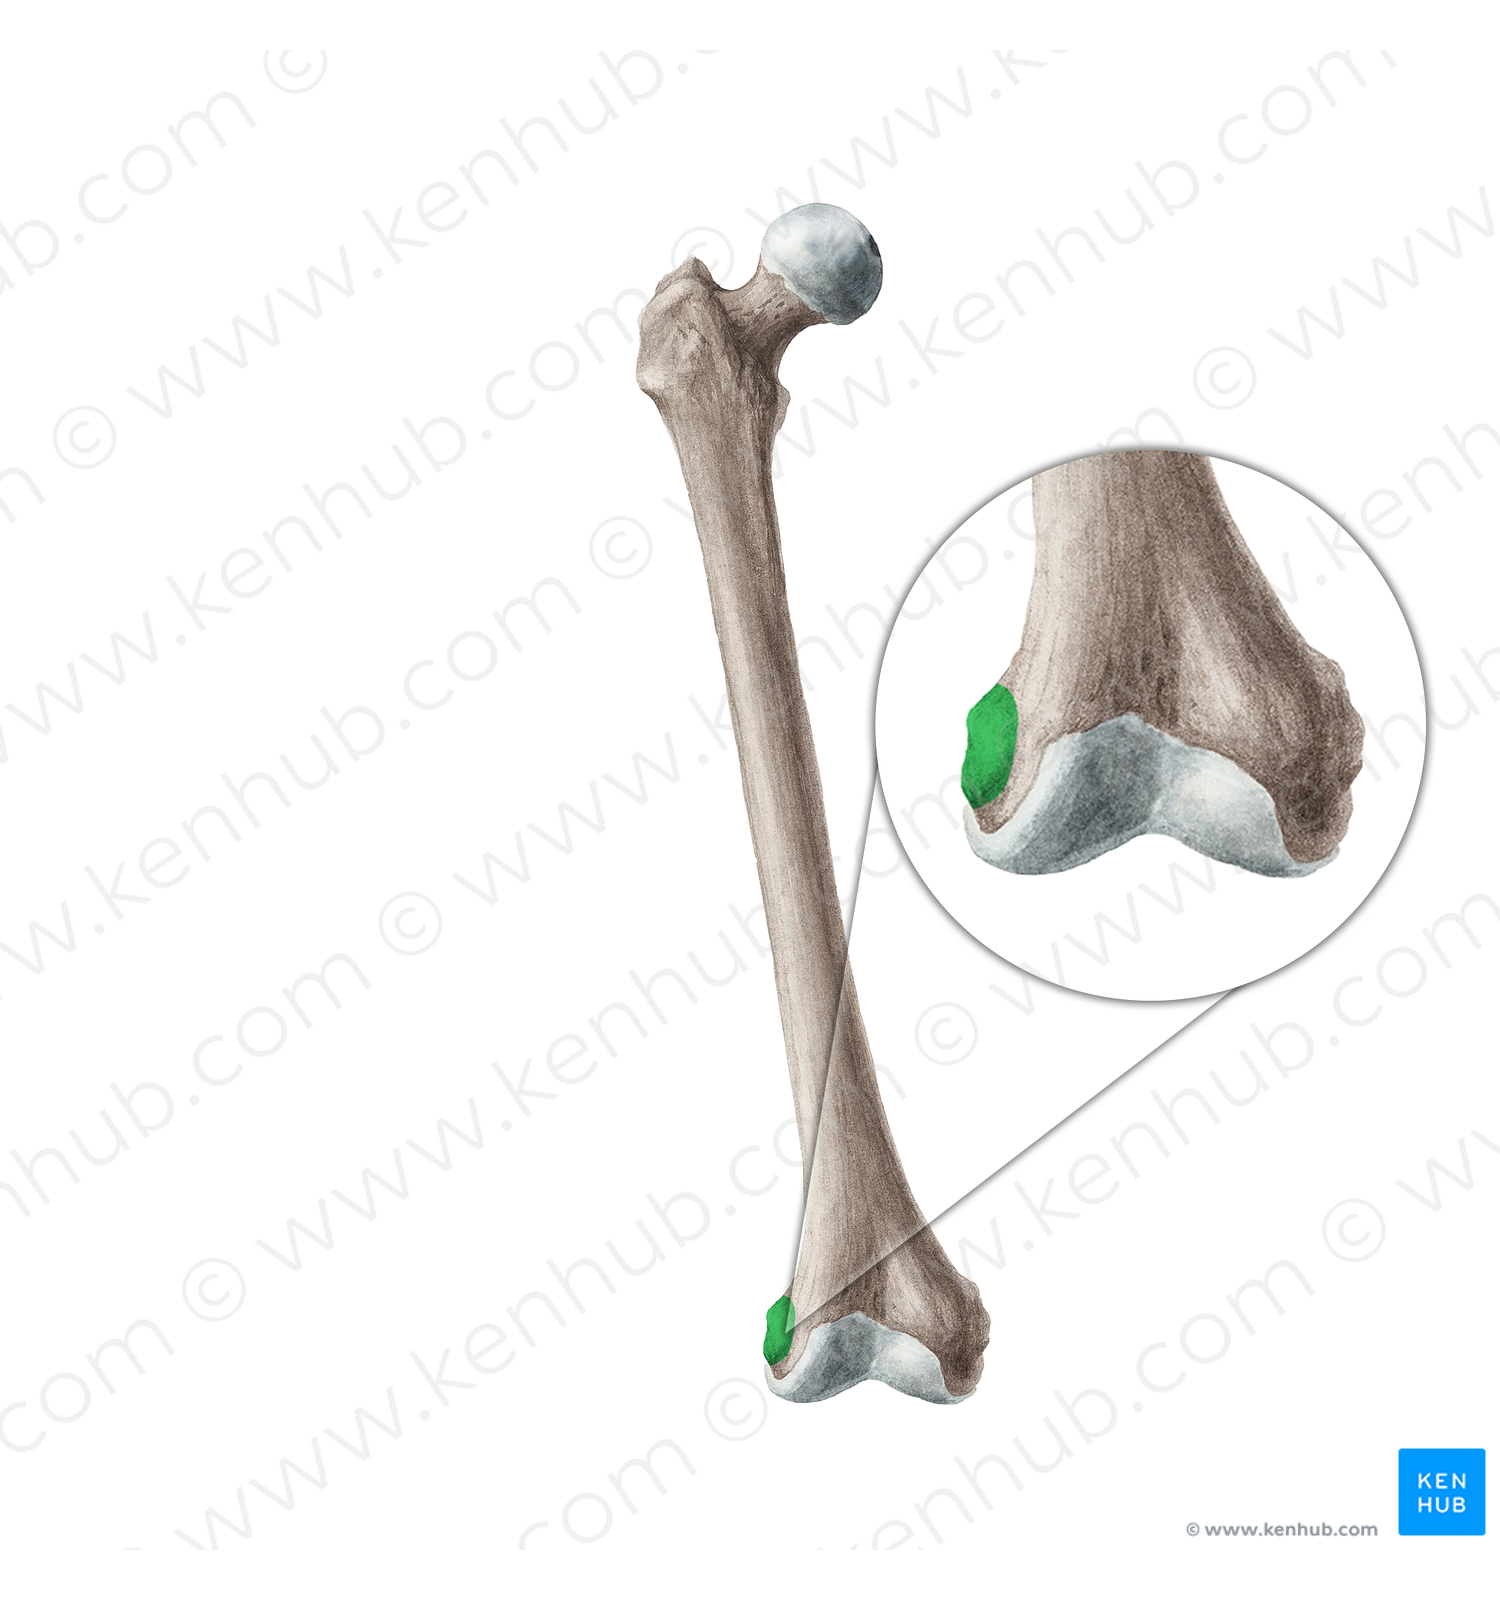 Lateral epicondyle of femur (#3393)